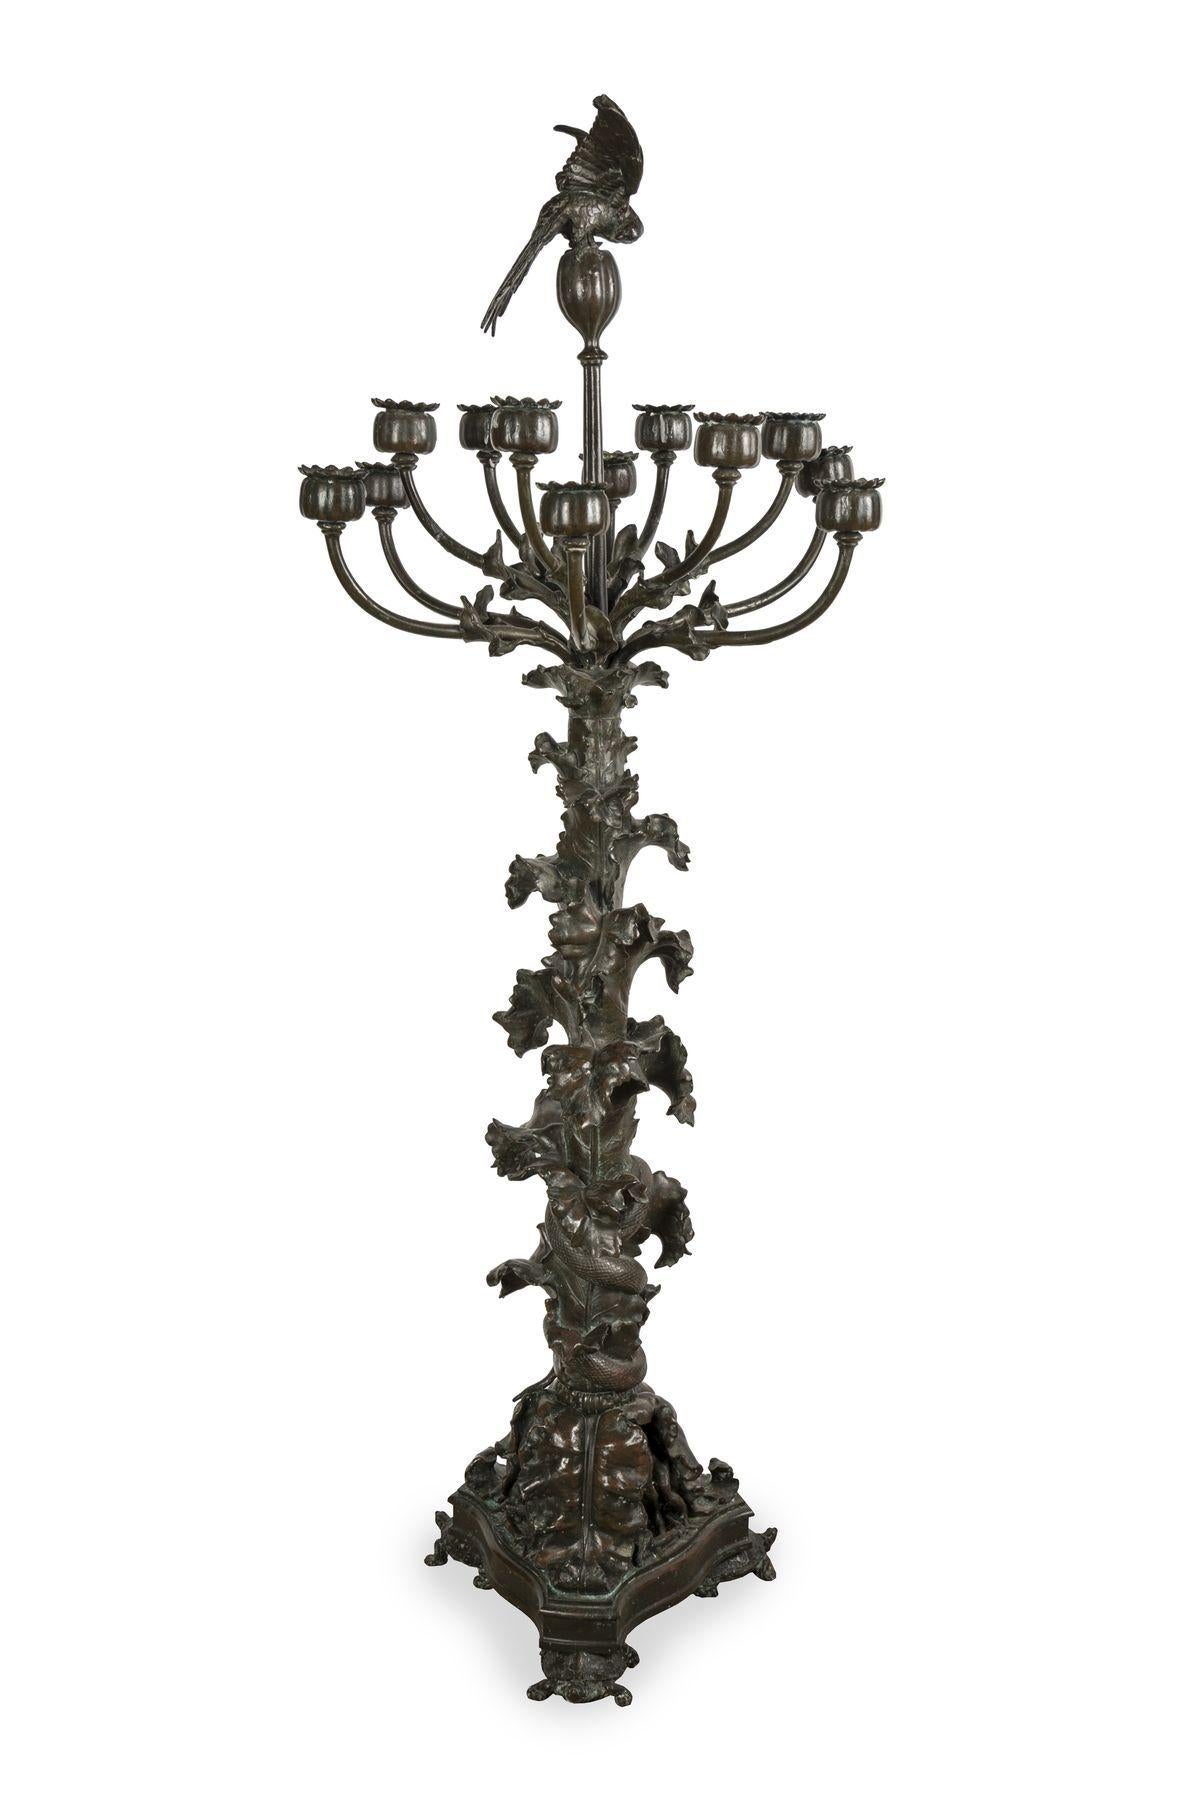 Poppy and parakeet candelabra by Antoine-Louis Barye, circa 1850
Patinated bronze
Middle of the 19th century
Measures: Height 98 cm, diameter (branches) 38 cm, length (foot) 25 cm.

Large pair of bronze candelabra with a brown patina, composed